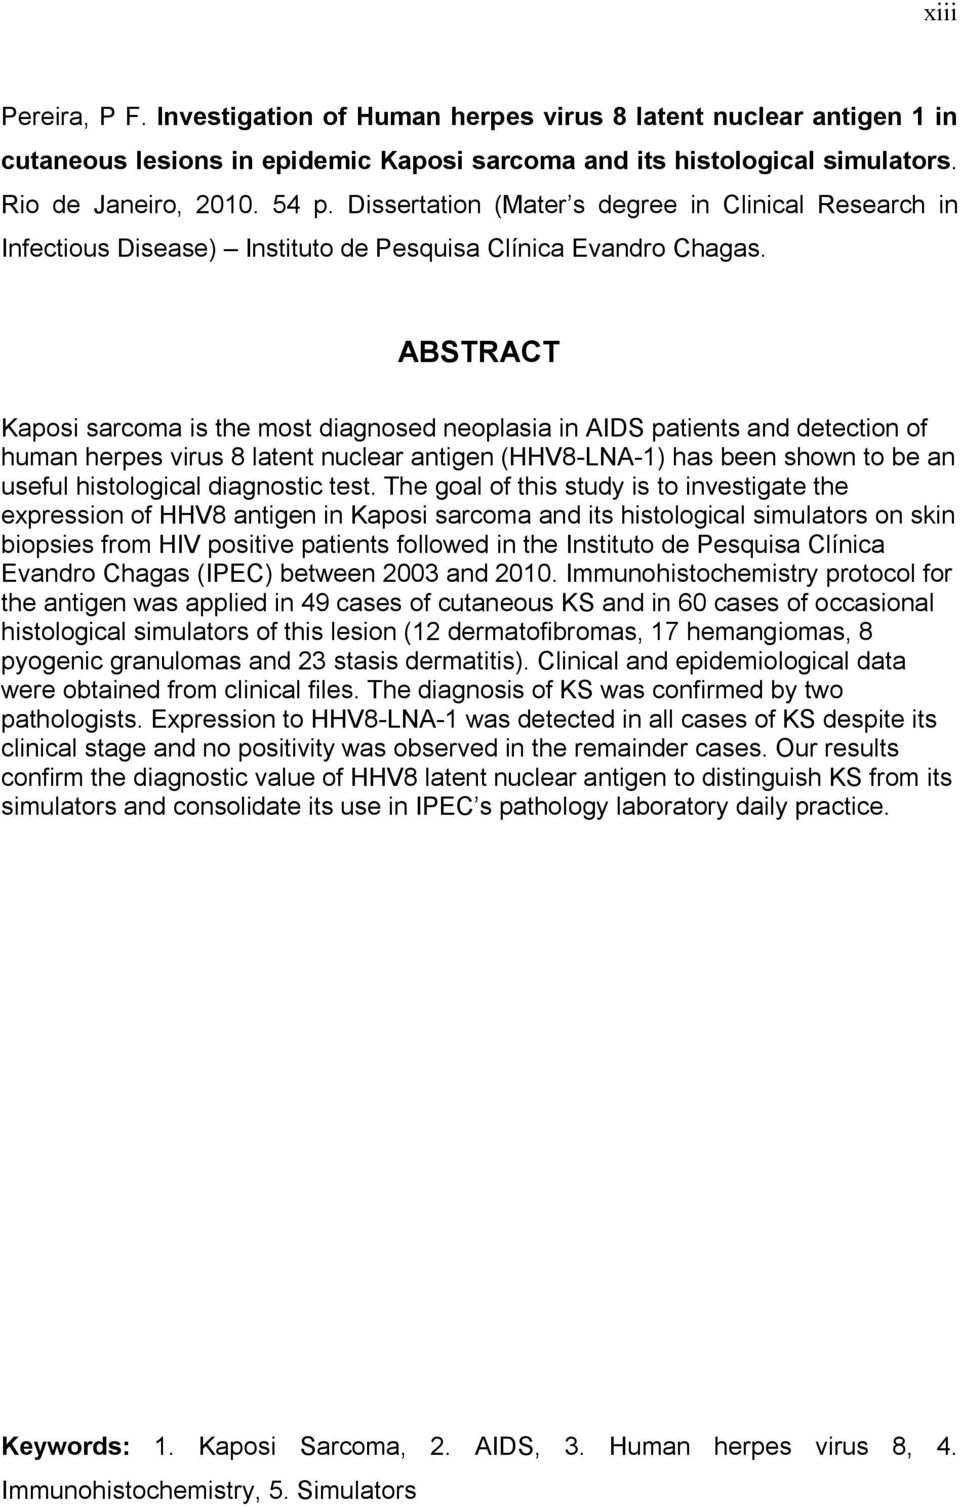 ABSTRACT Kaposi sarcoma is the most diagnosed neoplasia in AIDS patients and detection of human herpes virus 8 latent nuclear antigen (HHV8-LNA-1) has been shown to be an useful histological